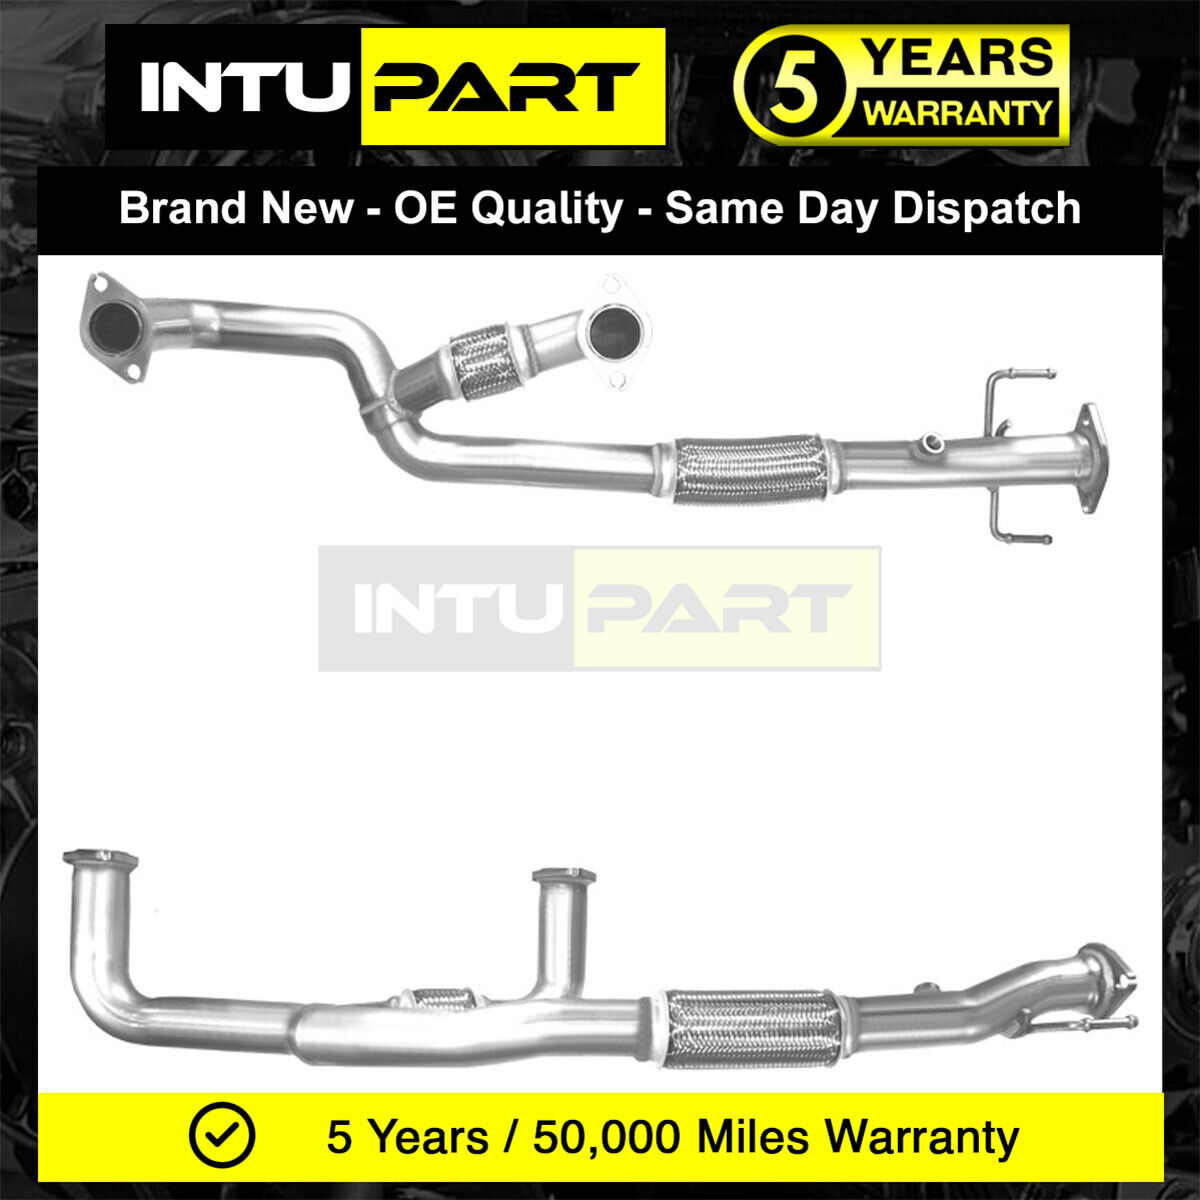 Fits Mitsubishi FTO 1994-2001 1.8 2.0 Inutpart Front Exhaust Pipe Euro 2